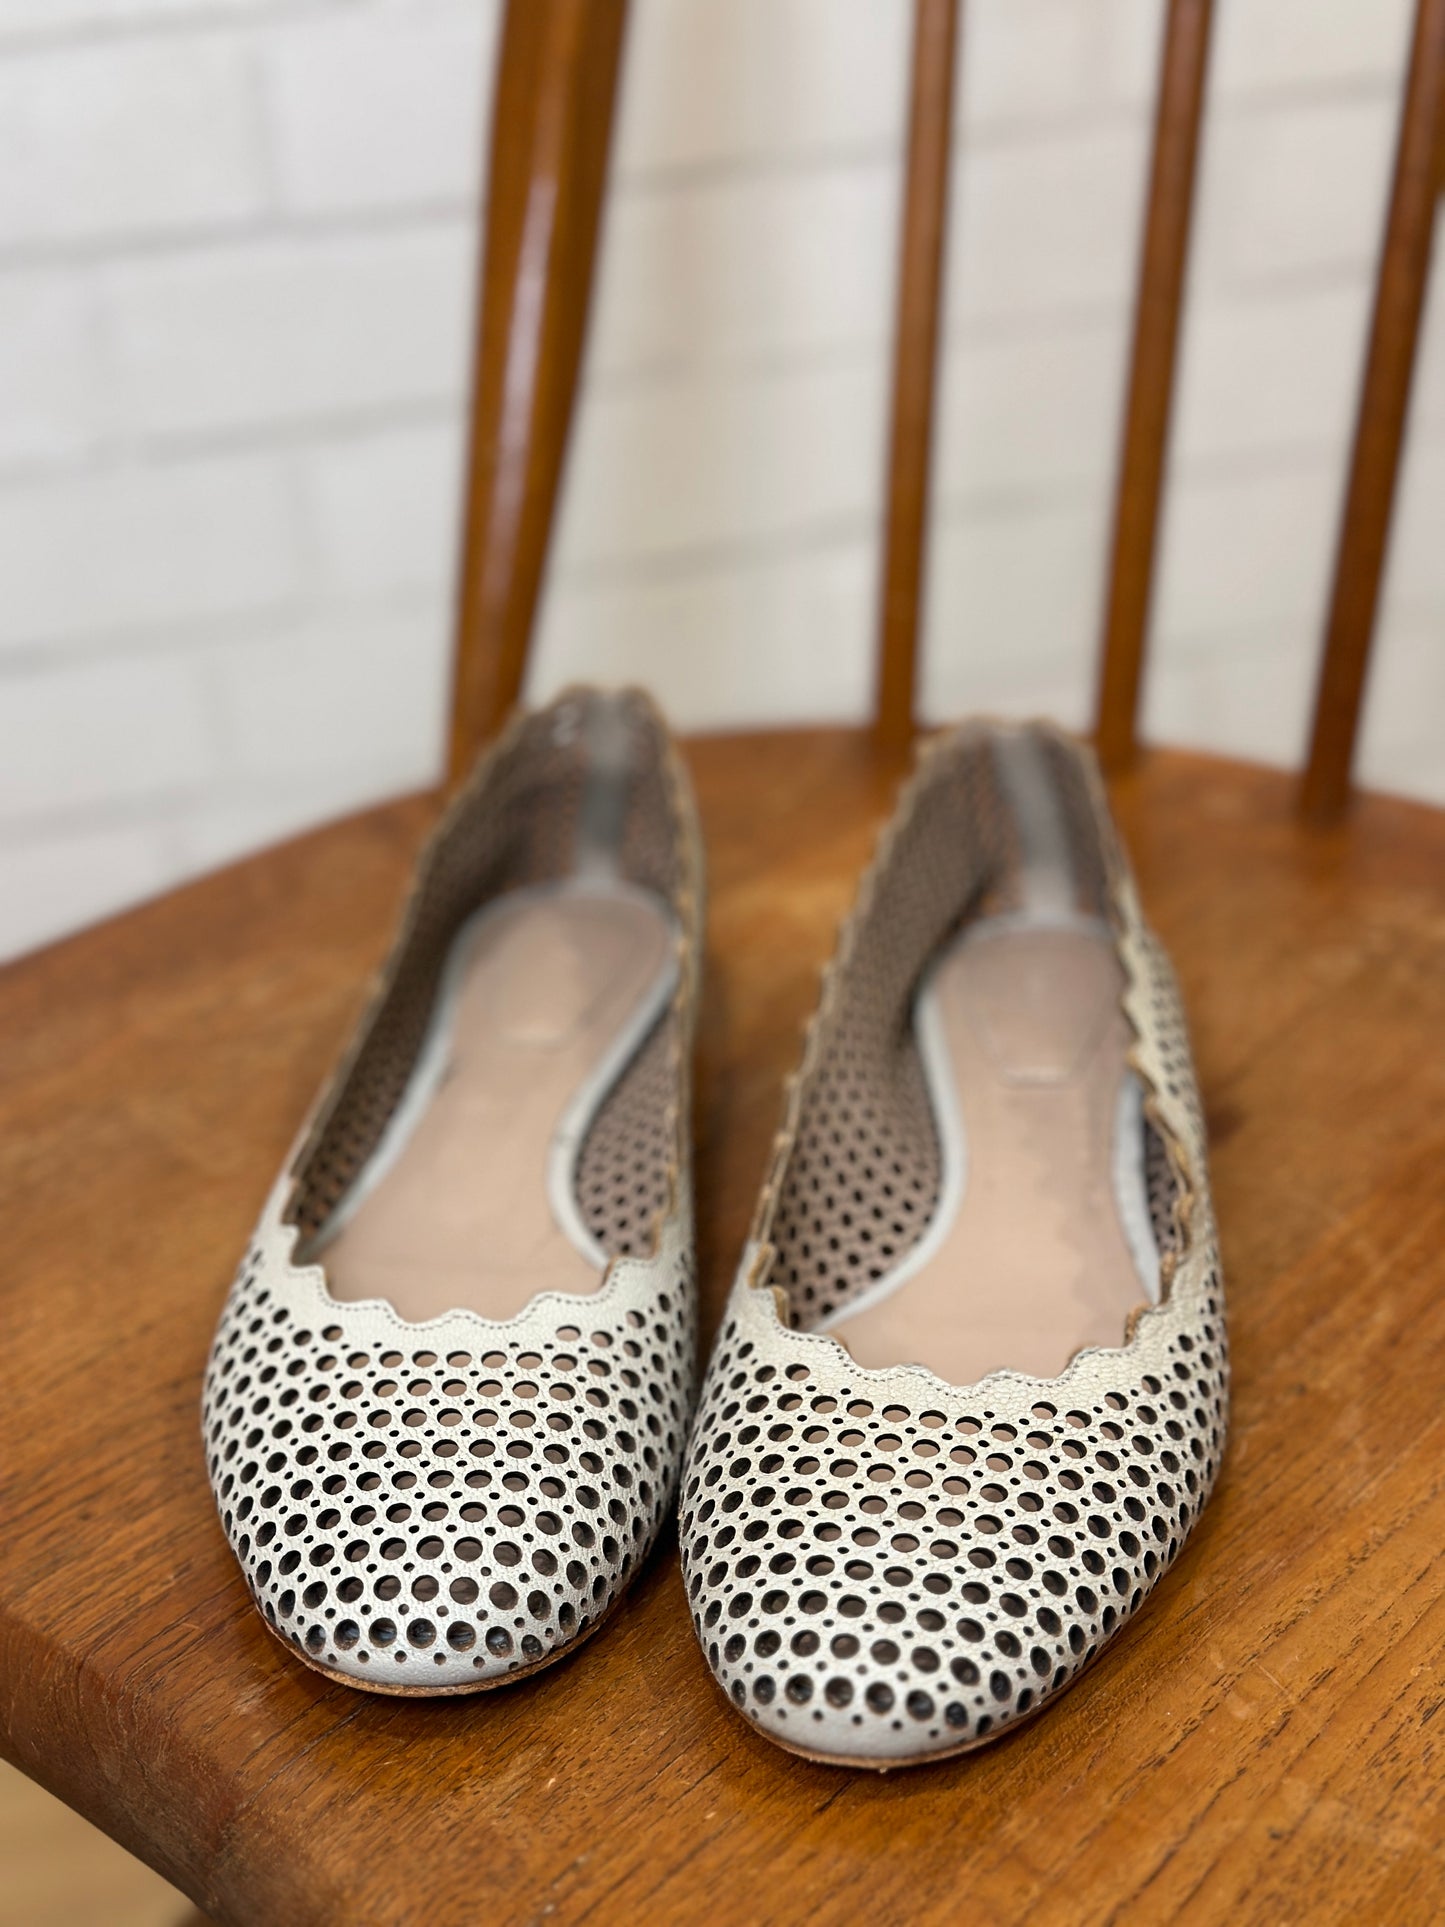 CHLOE Perforated Leather Ballet Flats Size 37.5-US7.5